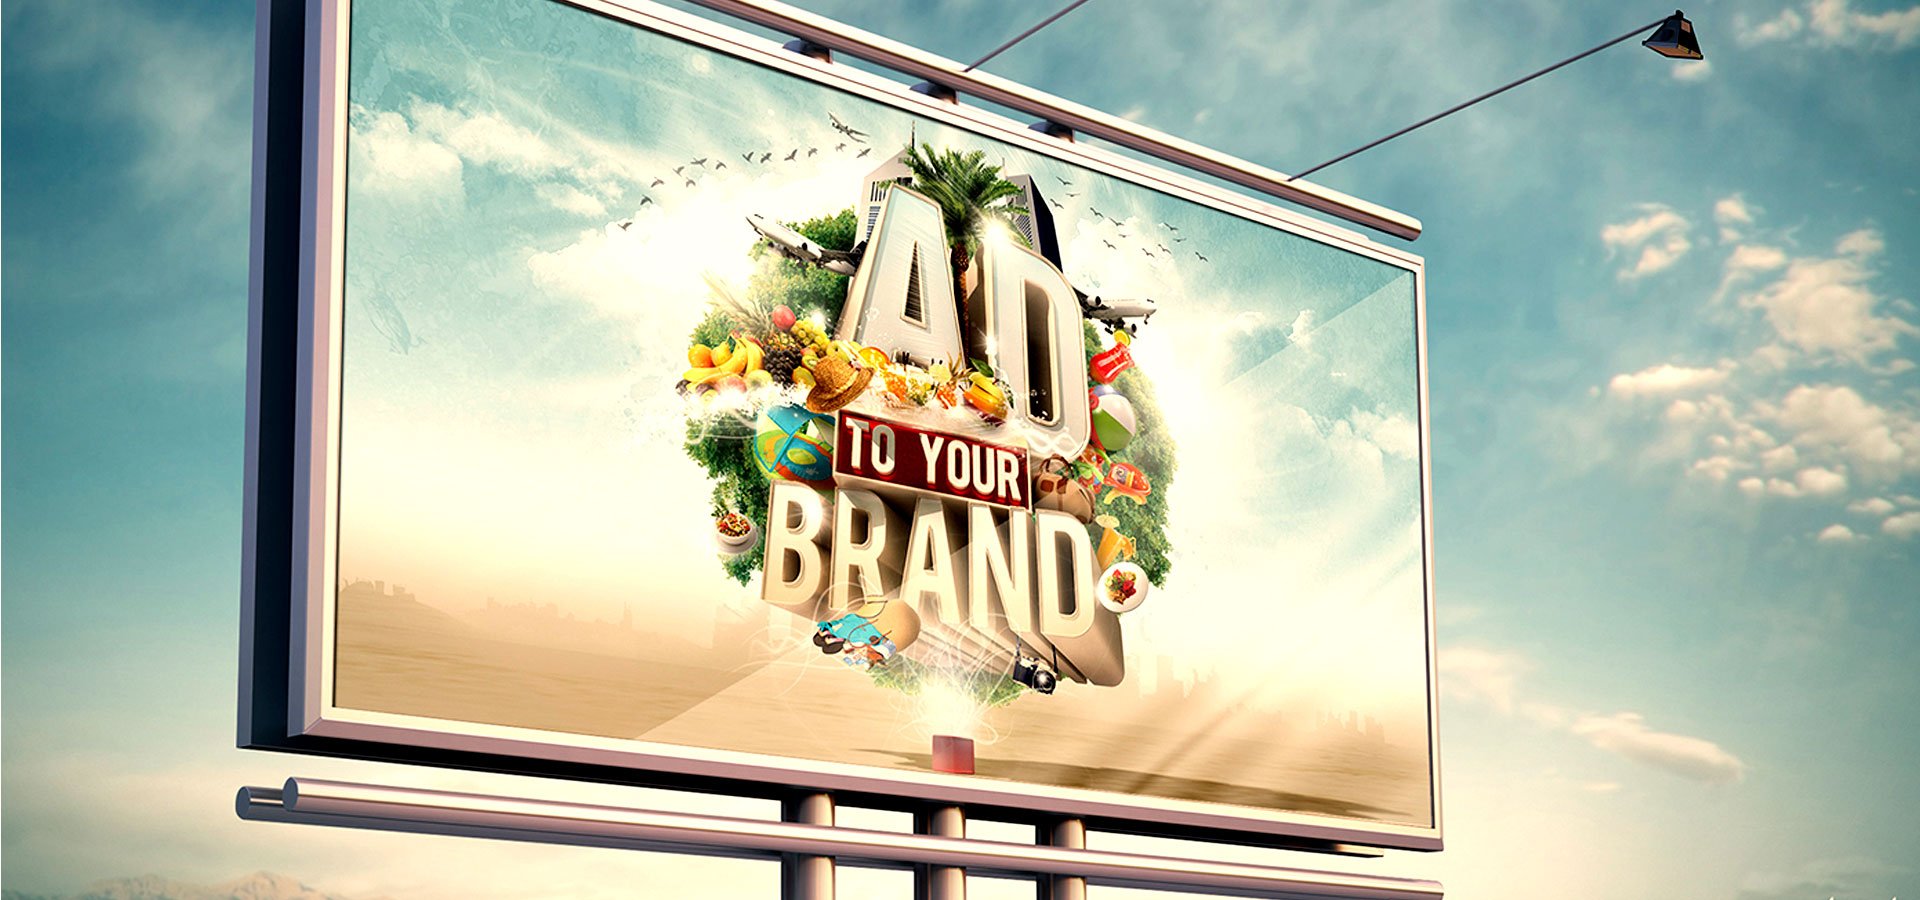 23+ Creative Advertising Banners - PSD, AI